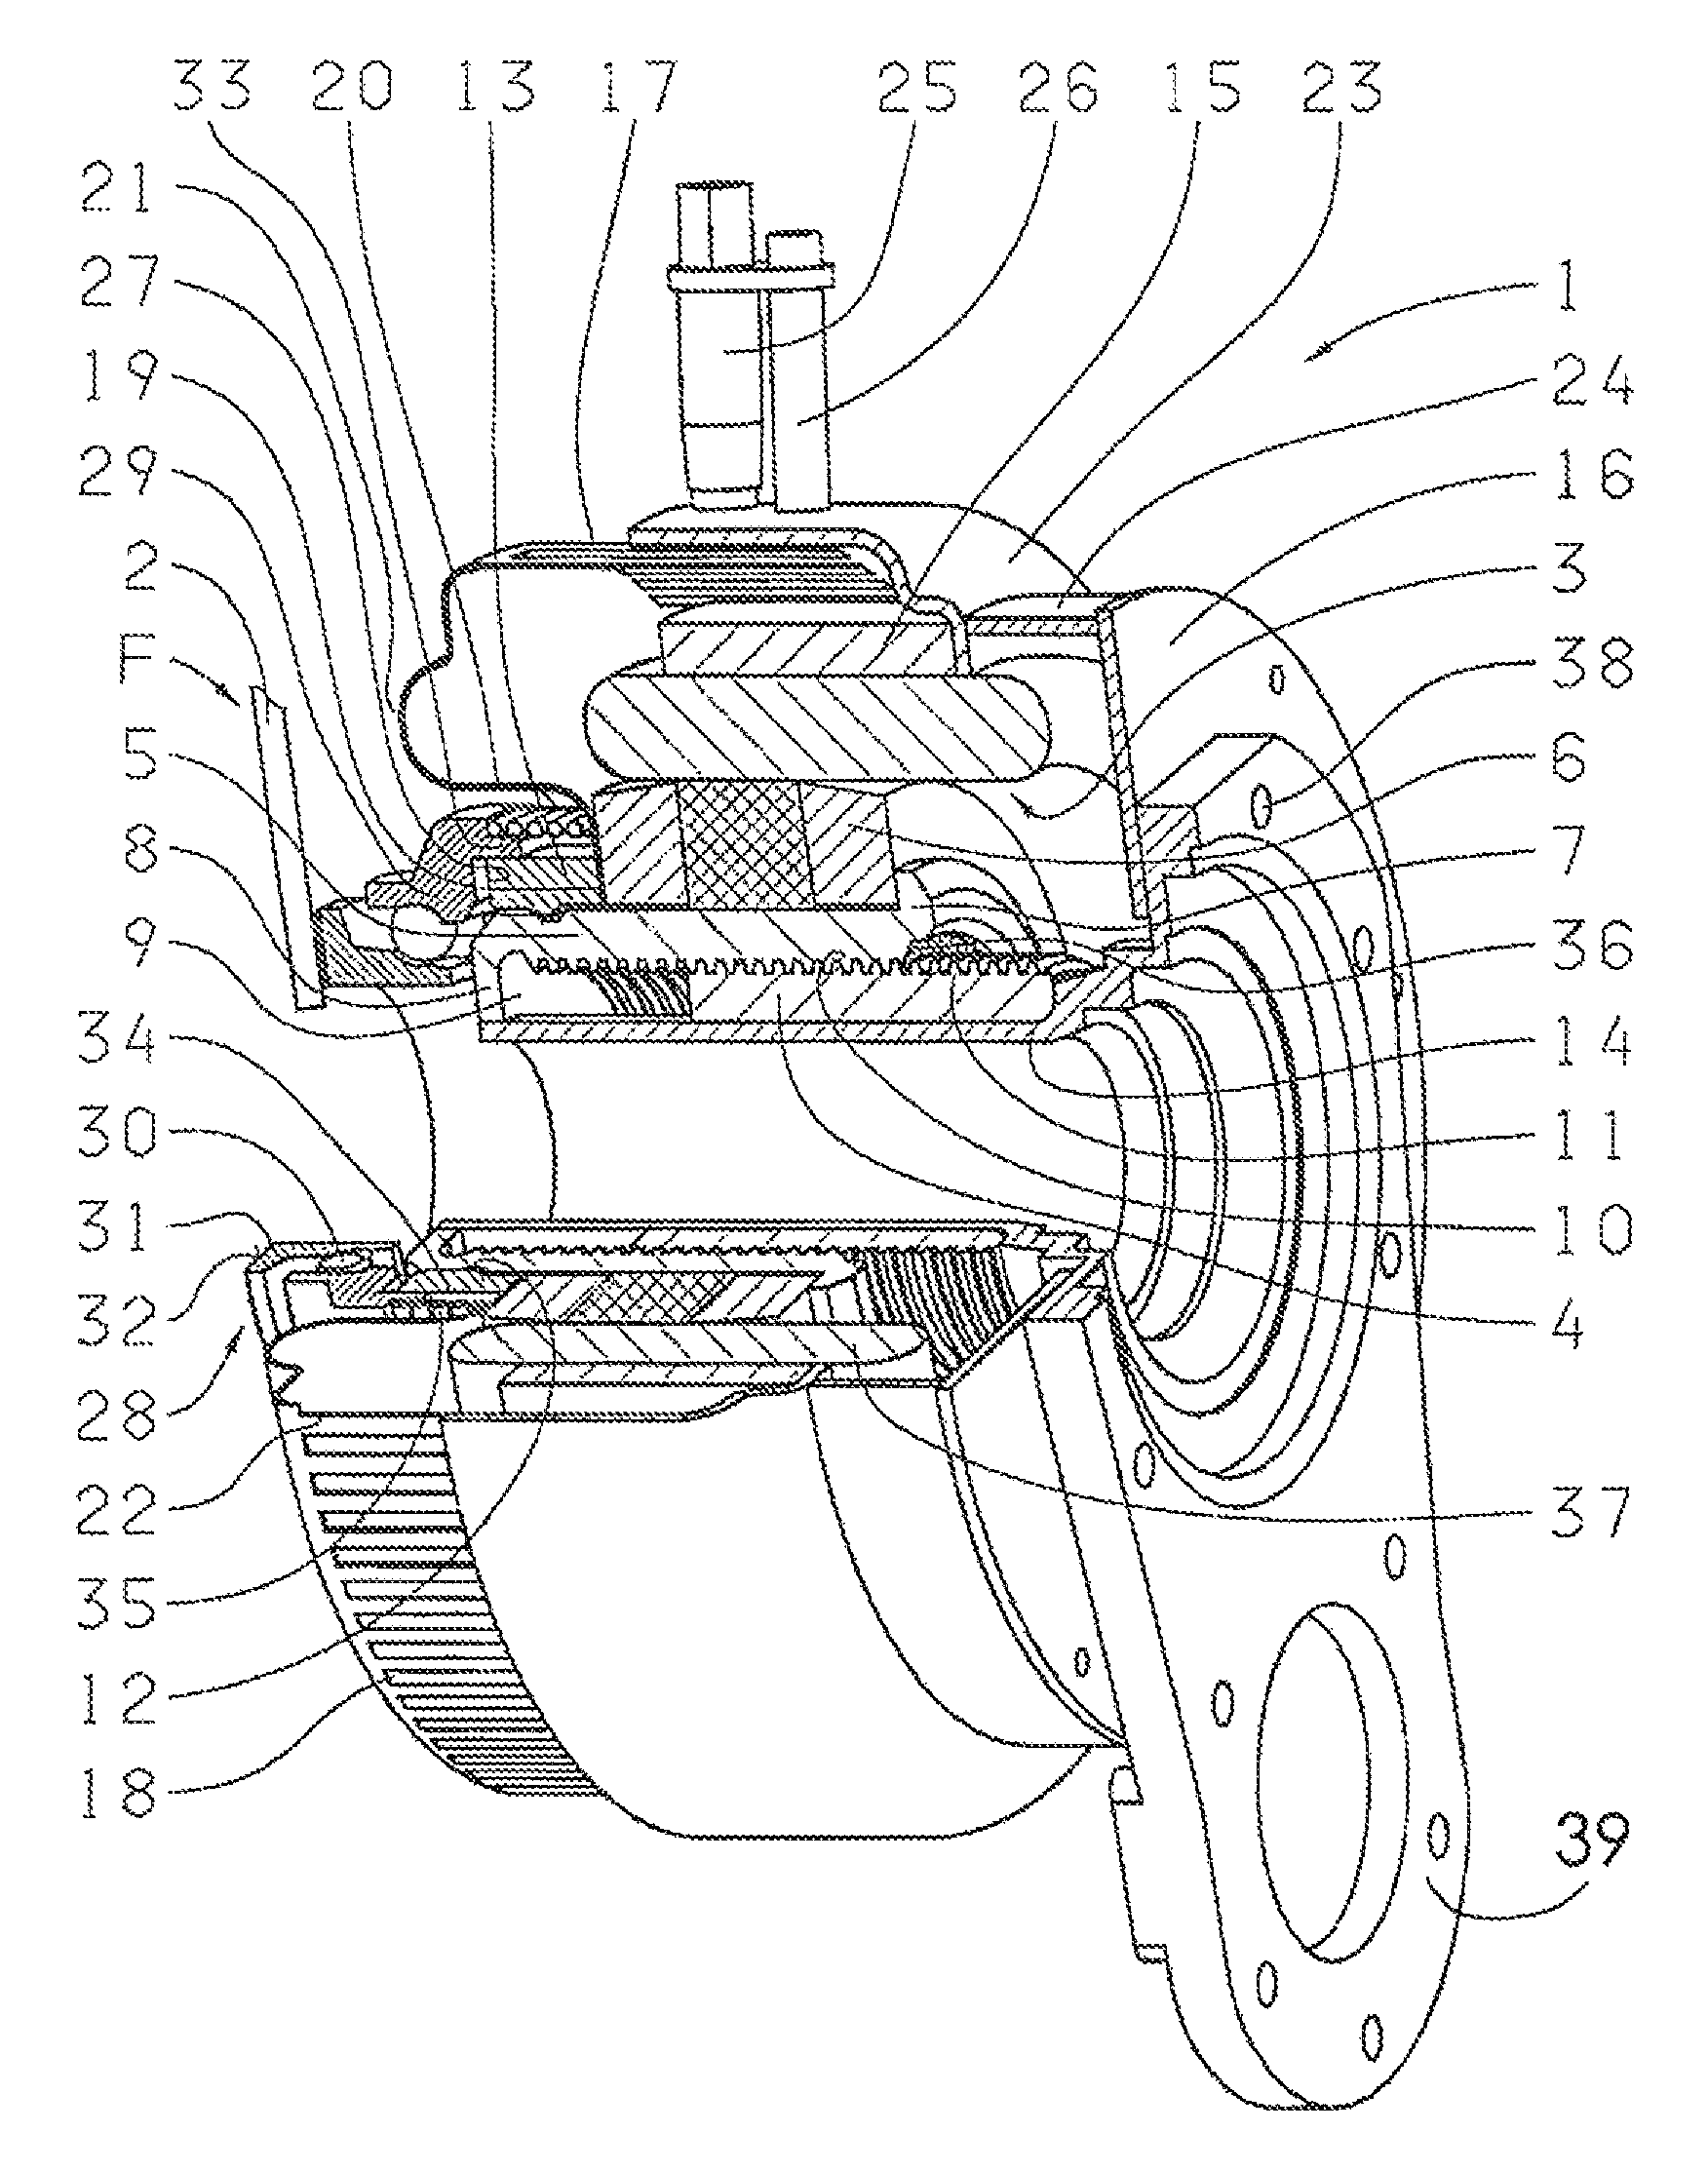 Electromotive actuator for deflecting a motor vehicle part